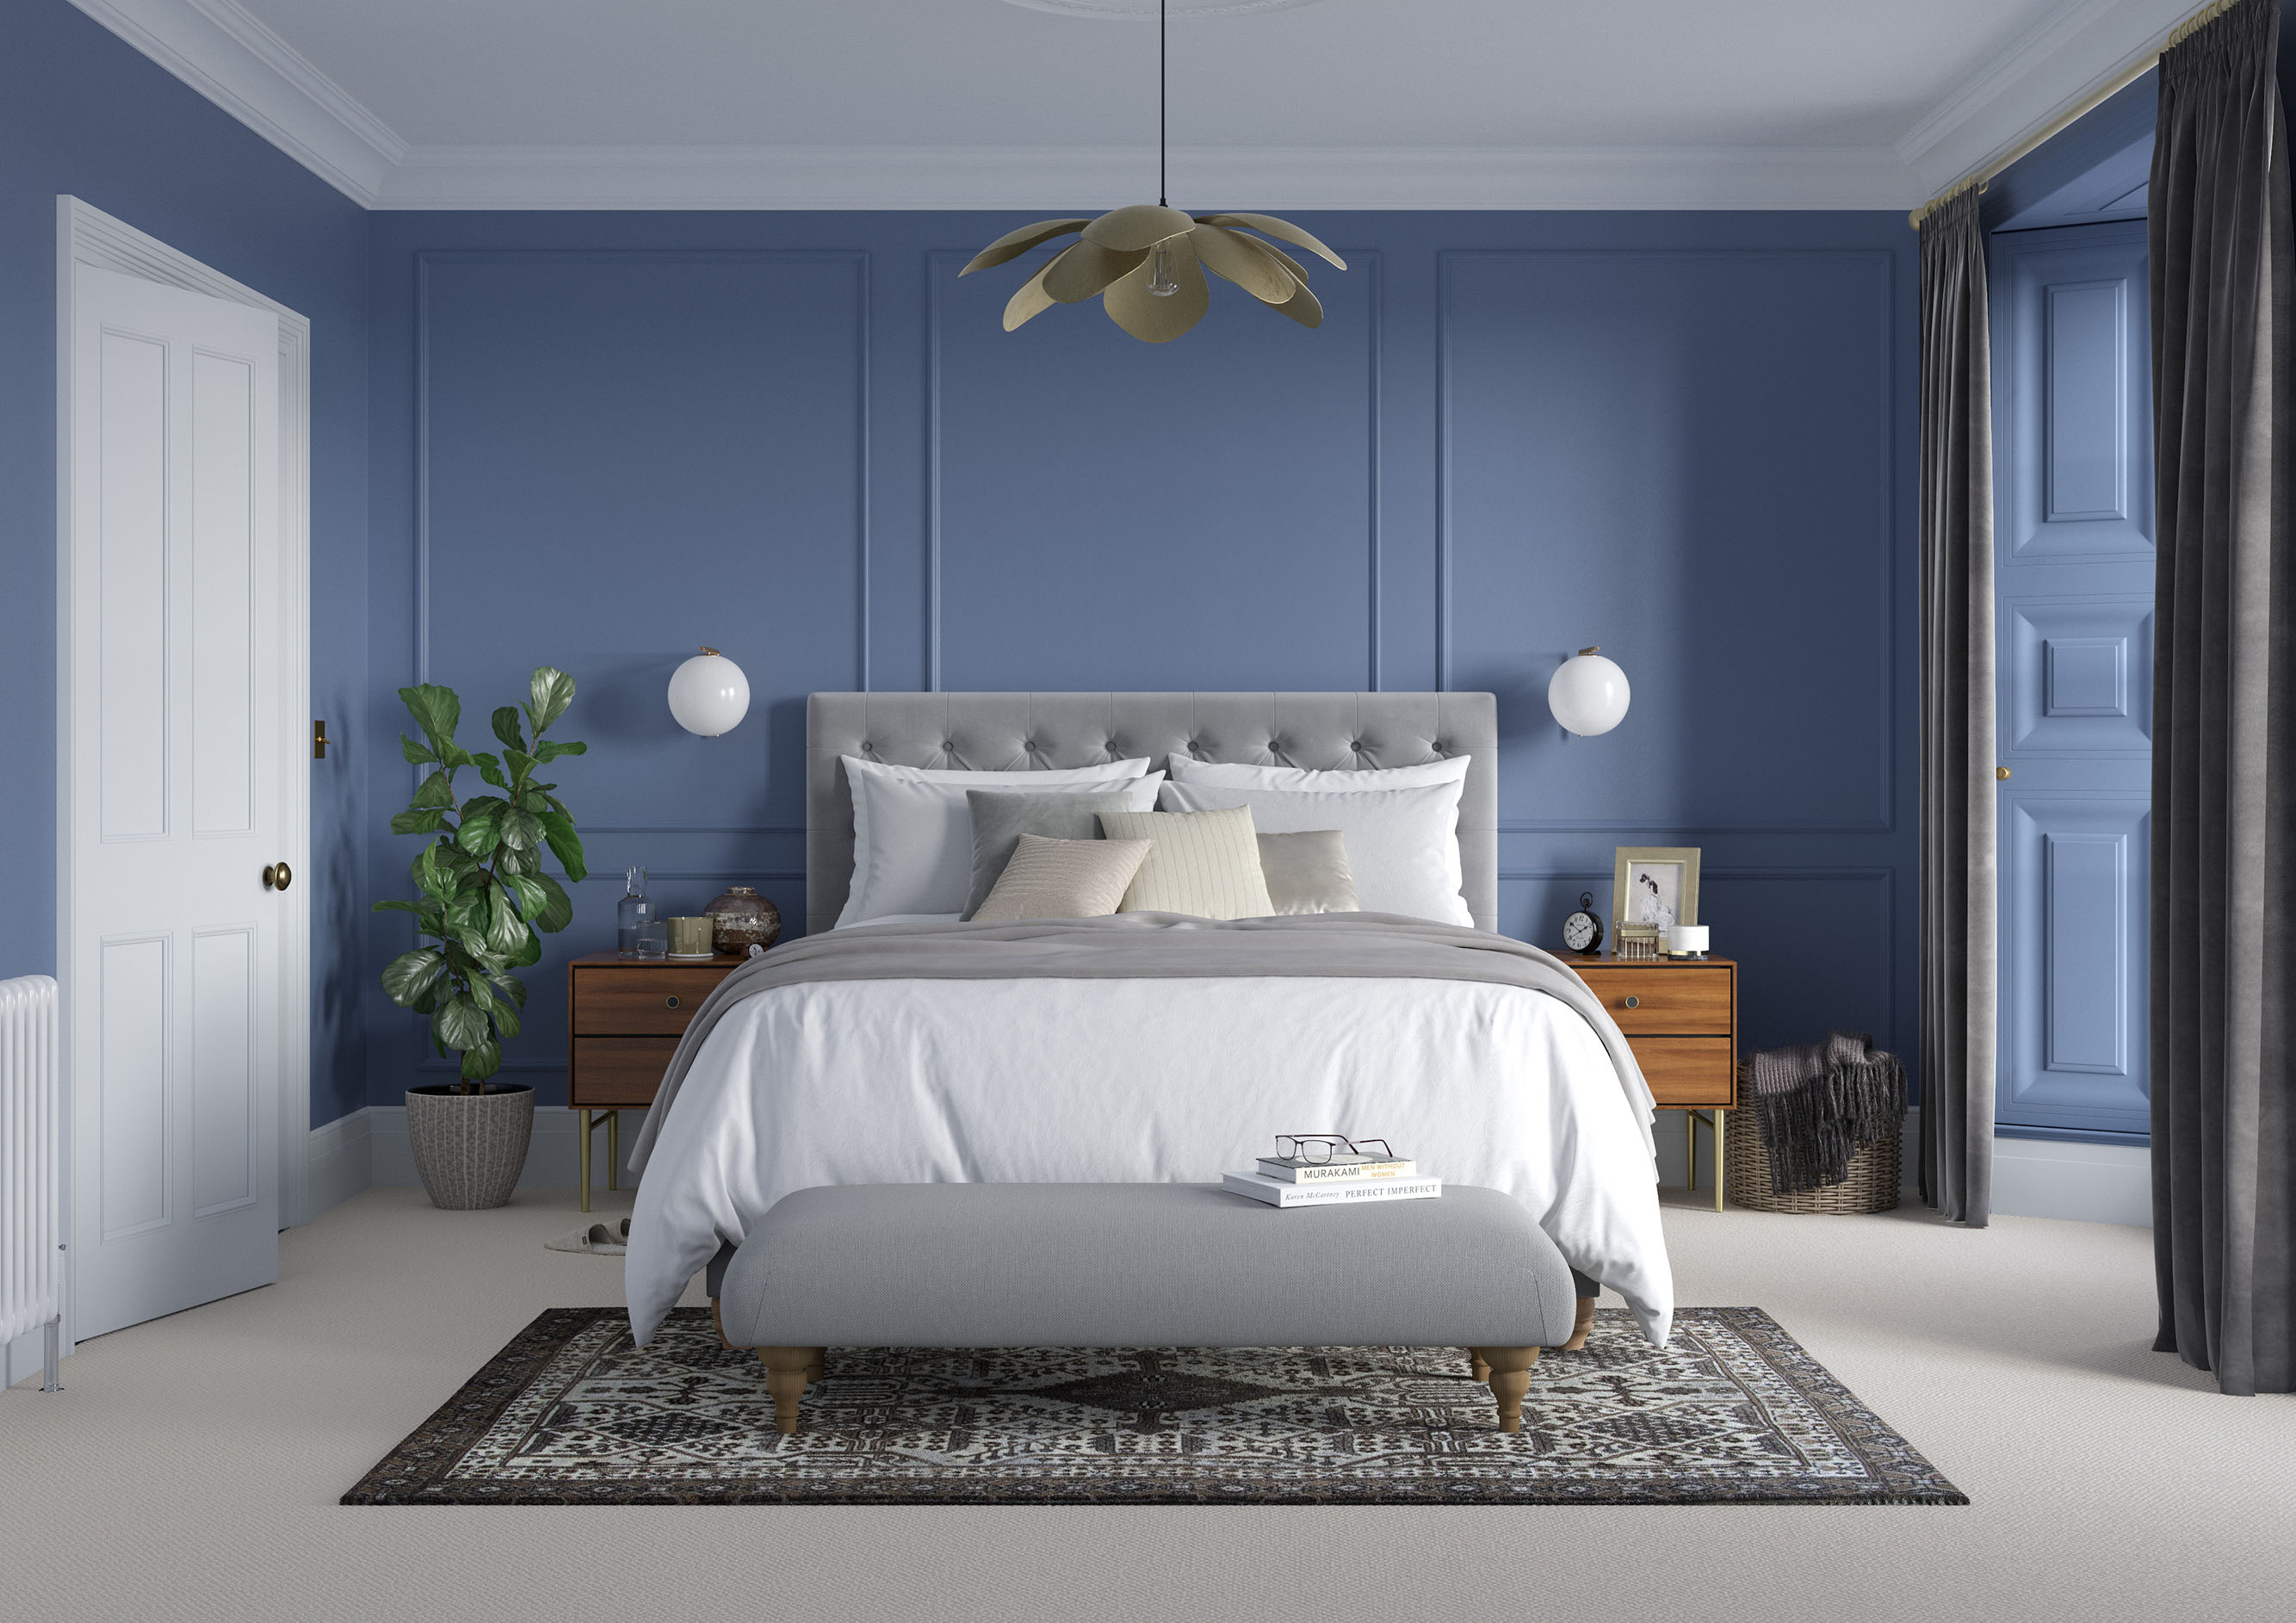 26792 Bedroom   Wall   Dh Indigo, Door   Lead White, Skirting   Lead White, Cornice   Light French Grey, Ceiling   Light French Grey